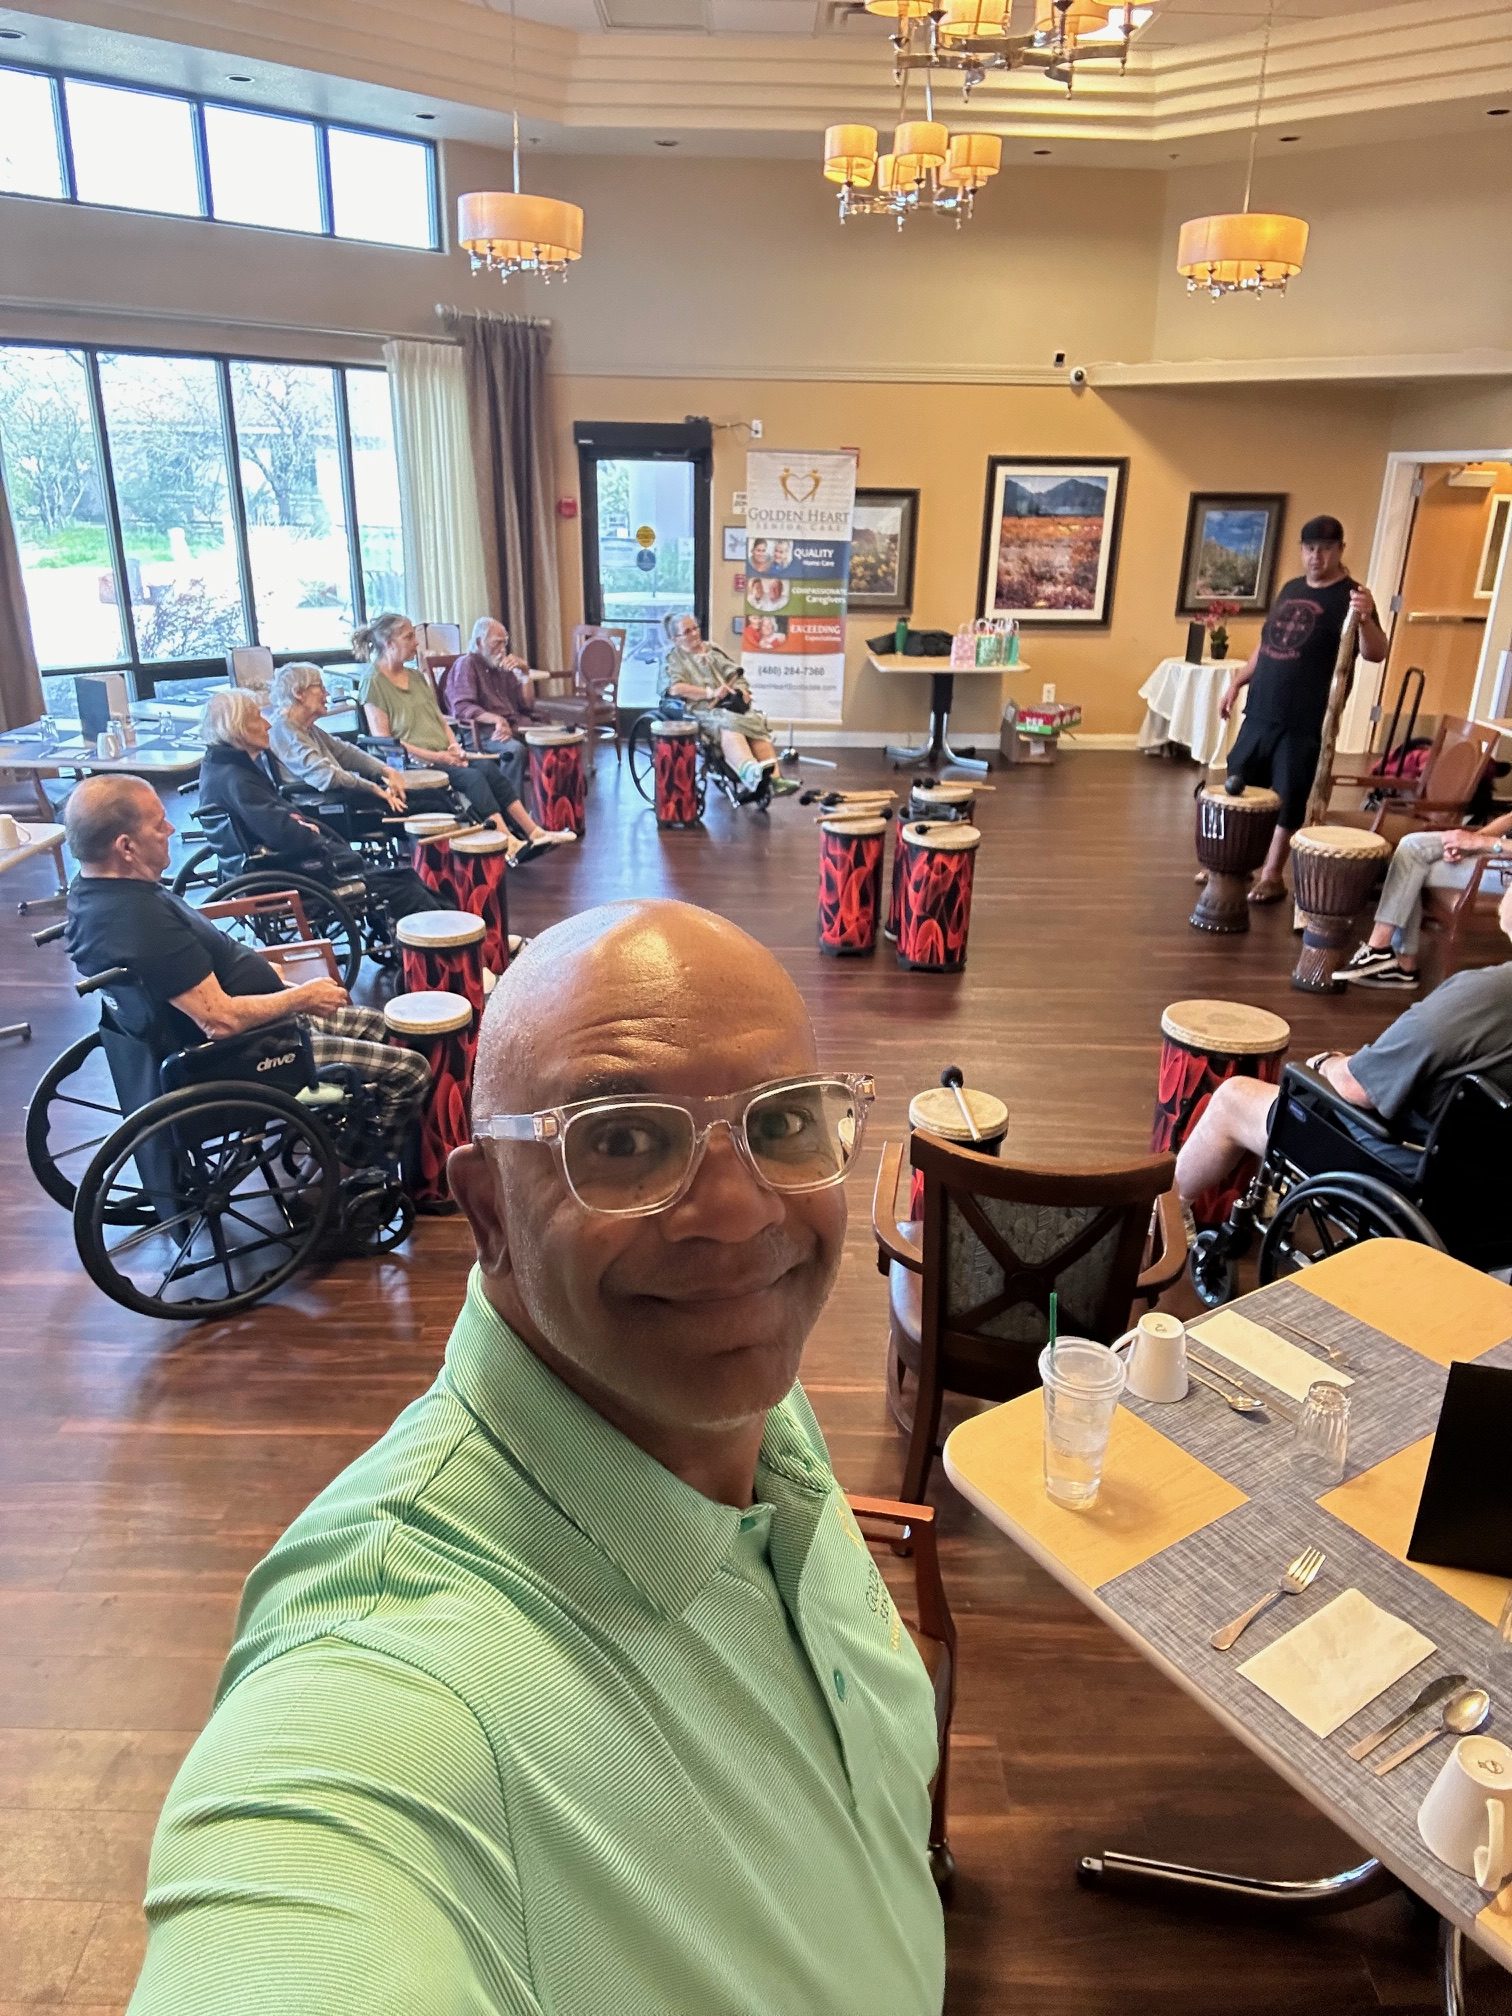 Visiting with Post Acute Rehabilitation Center!